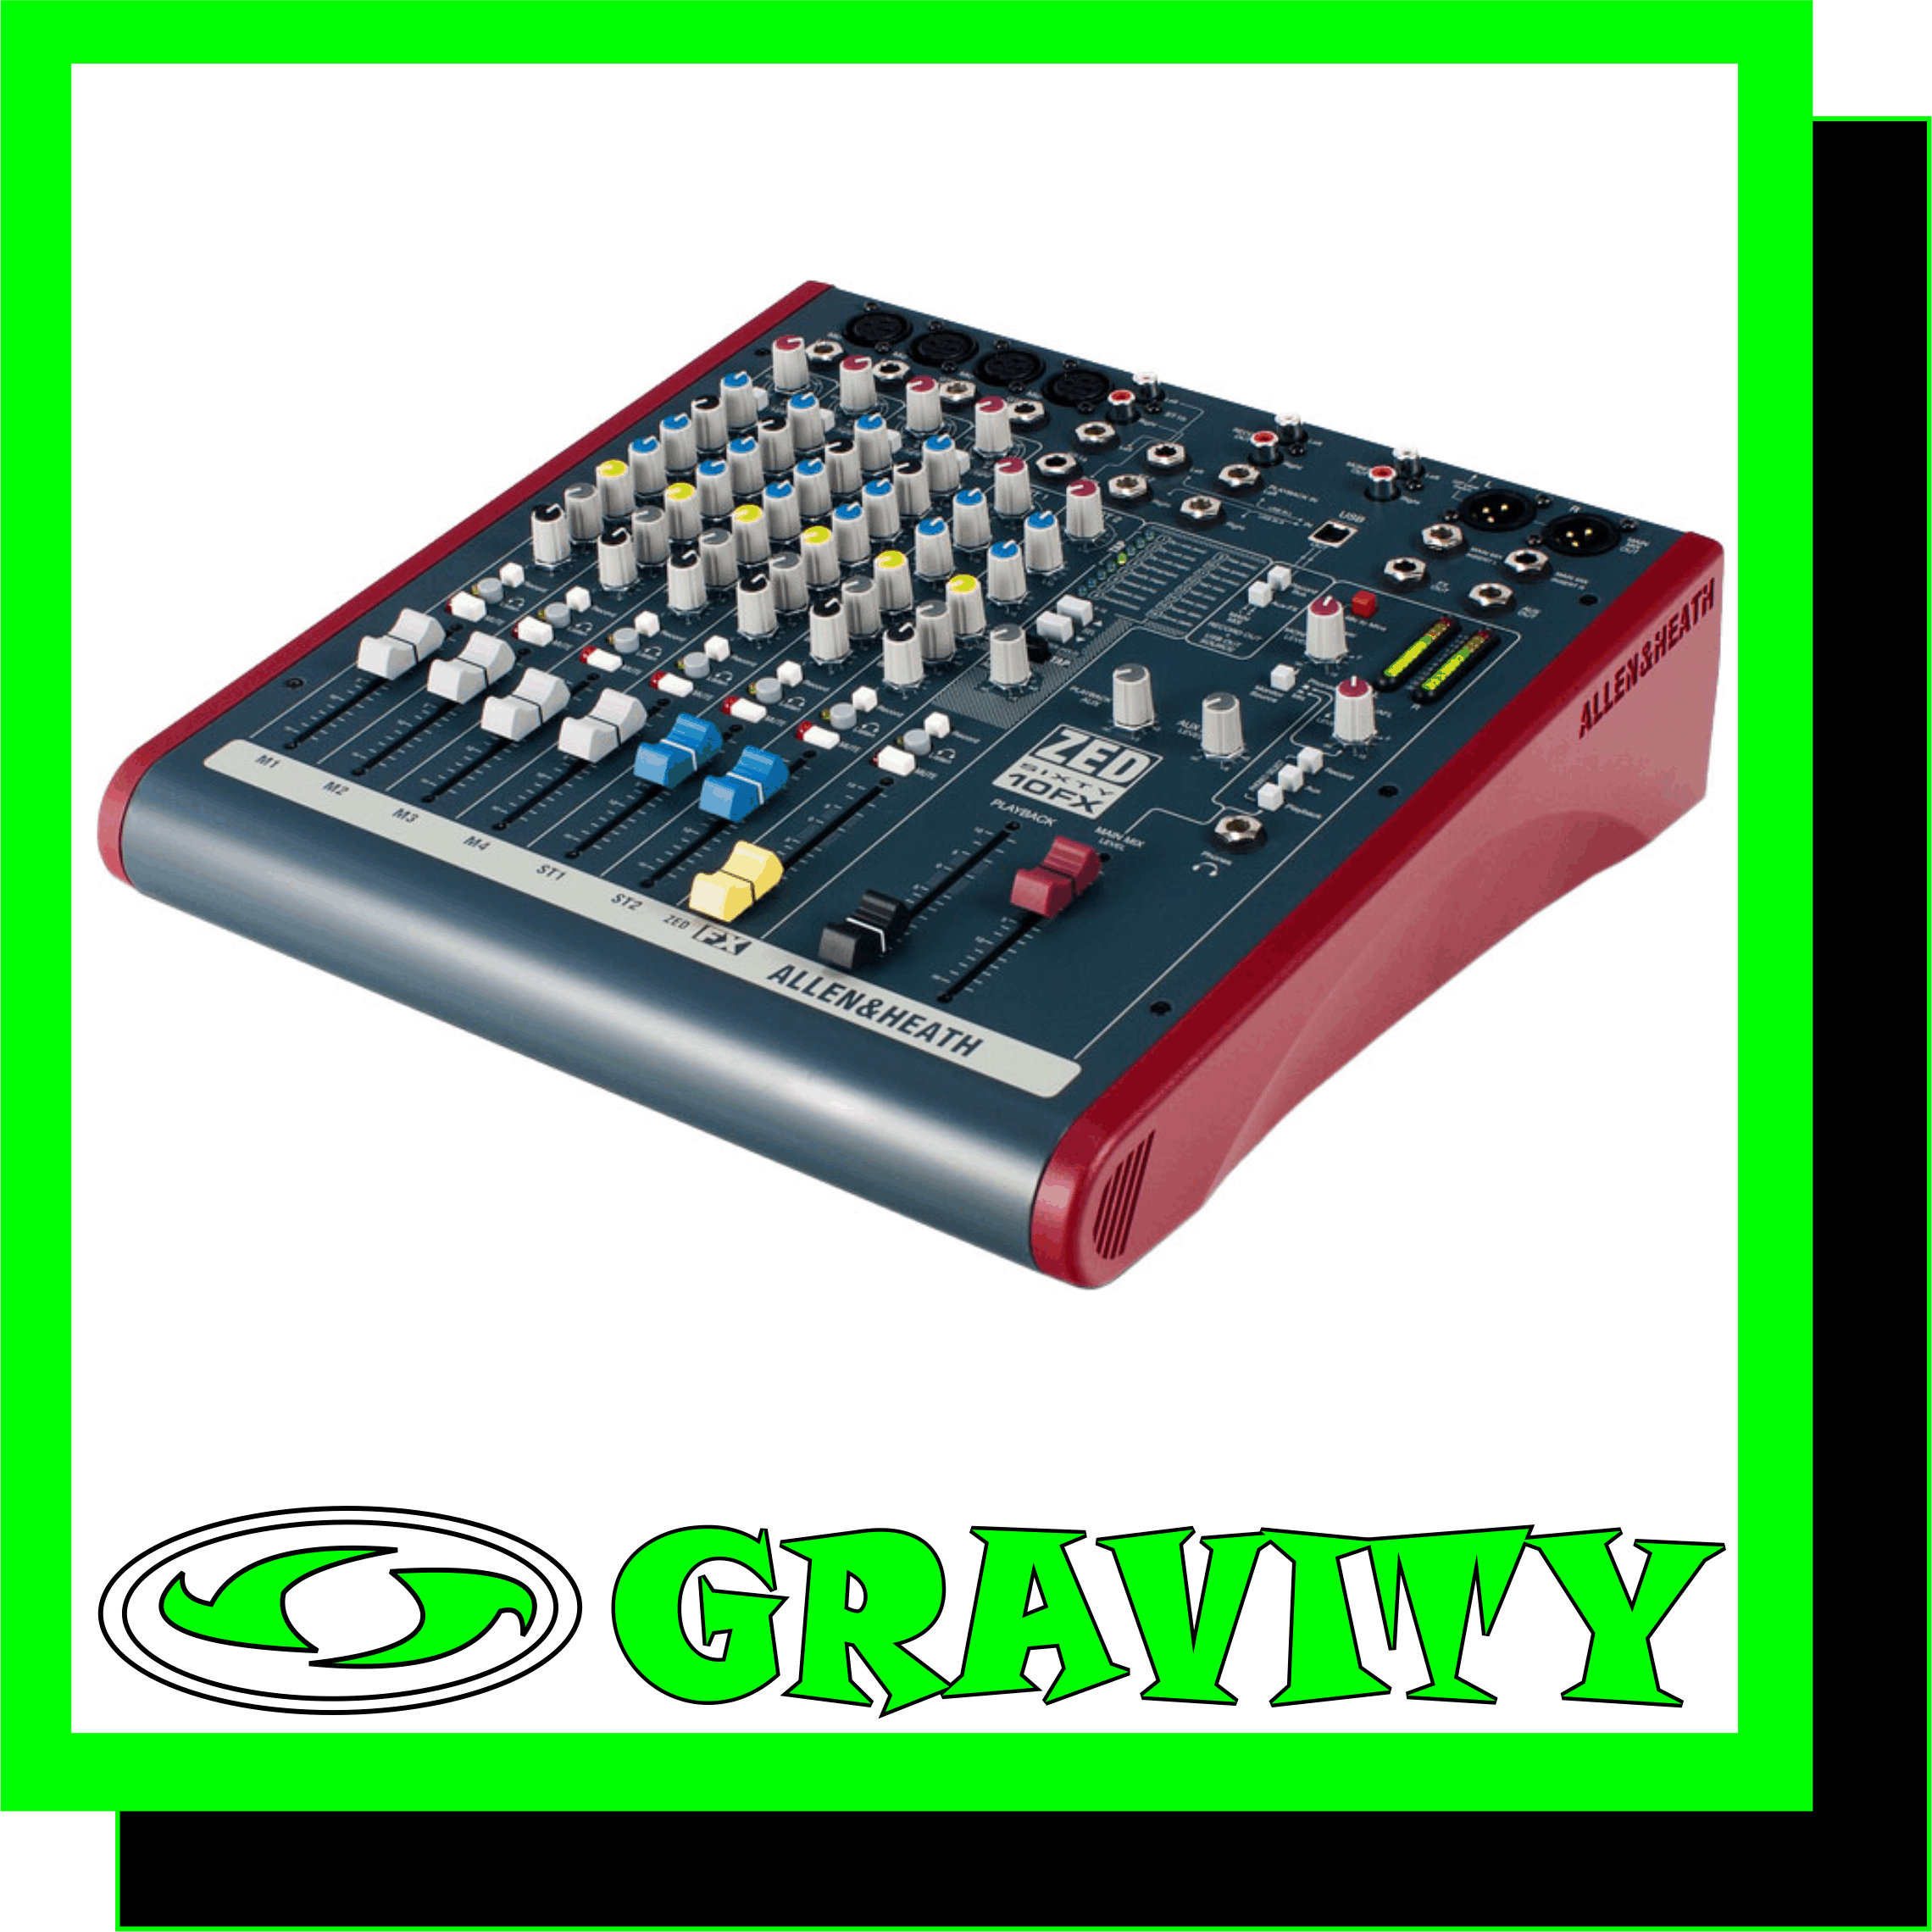 ZED60-10FX    Live or in the studio, ZED60-10FX is an ultra-portable mixer for solo artists and small bands.   FEATURE SUMMARY: -4 mic/line inputs, 2 with Class A FET high impedance -60mm professional quality faders -Responsive 3-band, swept mid EQ with MusiQ -Configurable USB stereo audio in/out -1 pre-fade Aux send -1 FX send -2 stereo inputs -Separate 2-track record outputs -16 Internal Effects -XLR main stereo outputs with inserts -Comprehensive monitoring -48V microphone phantom power -DI level switching with Gain Boost -Neutrik XLRs and 1/4 inch jacks  Based on our top selling ZED-10FX, the new ZED60-10FX adds premium quality 60mm faders for that intuitive, tactile mixing experience.  This mixer is a guitarist’s dream. Two of the 4 mono channels have high impedance jack inputs that can take a normal line level or a low level input from a guitar pickup, so guitars can be plugged straight into the mixer without the need for DI boxes. These inputs have been crafted to recreate the sound of a classic tube preamp in a combo or head amp for incredible definition and warmth. Two stereo inputs are provided for MP3/CD players or keyboards.  ZED60-10FX comes with configurable USB audio in/out, making it easy to capture a stereo recording at the gig or in the studio. The mixer is equipped with professional XLR main stereo outputs, a flexible monitoring section with headphone and speaker feed outputs, and 16 stunning FX.    Most important of all, ZED60-10FX lives up to the audio and build quality standards that have made Allen & Heath one of the most trusted names in professional audio for more than 40 years.   